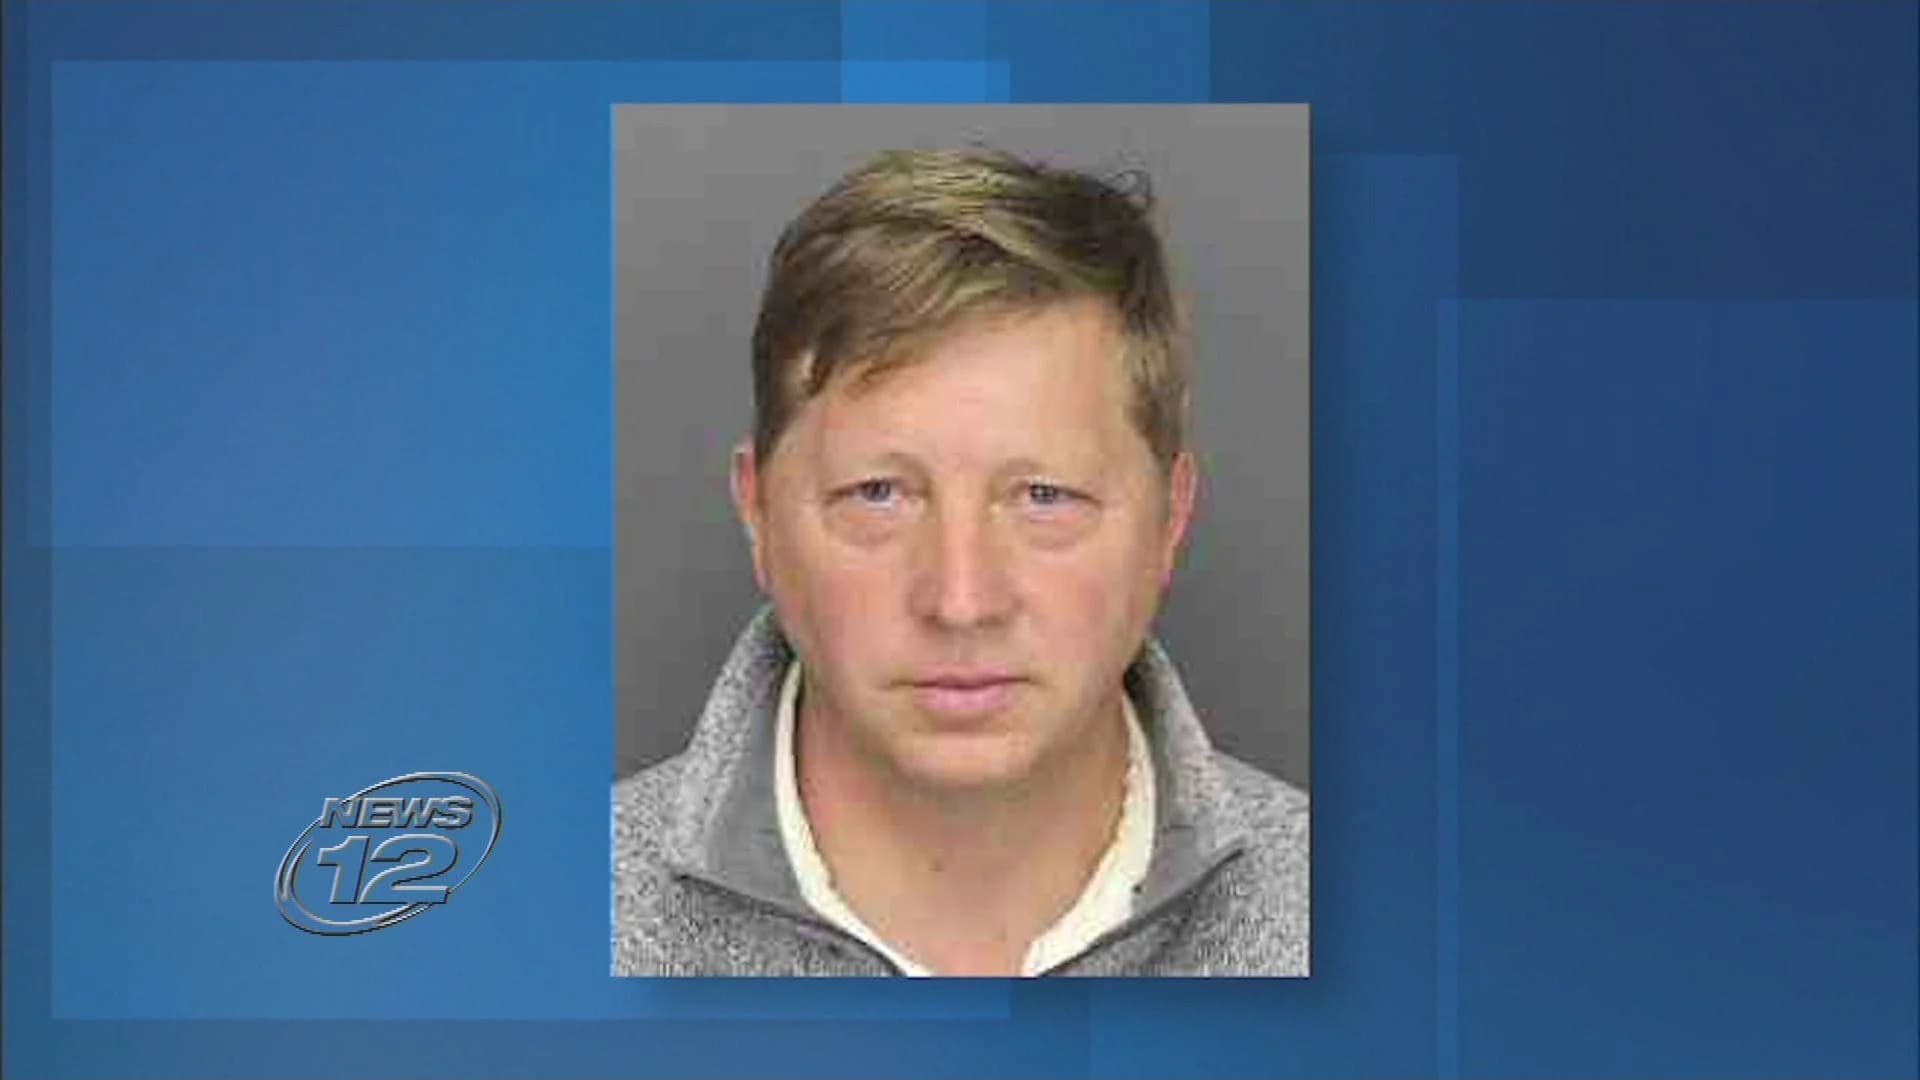 Pelham Village trustee arrested on child porn charges